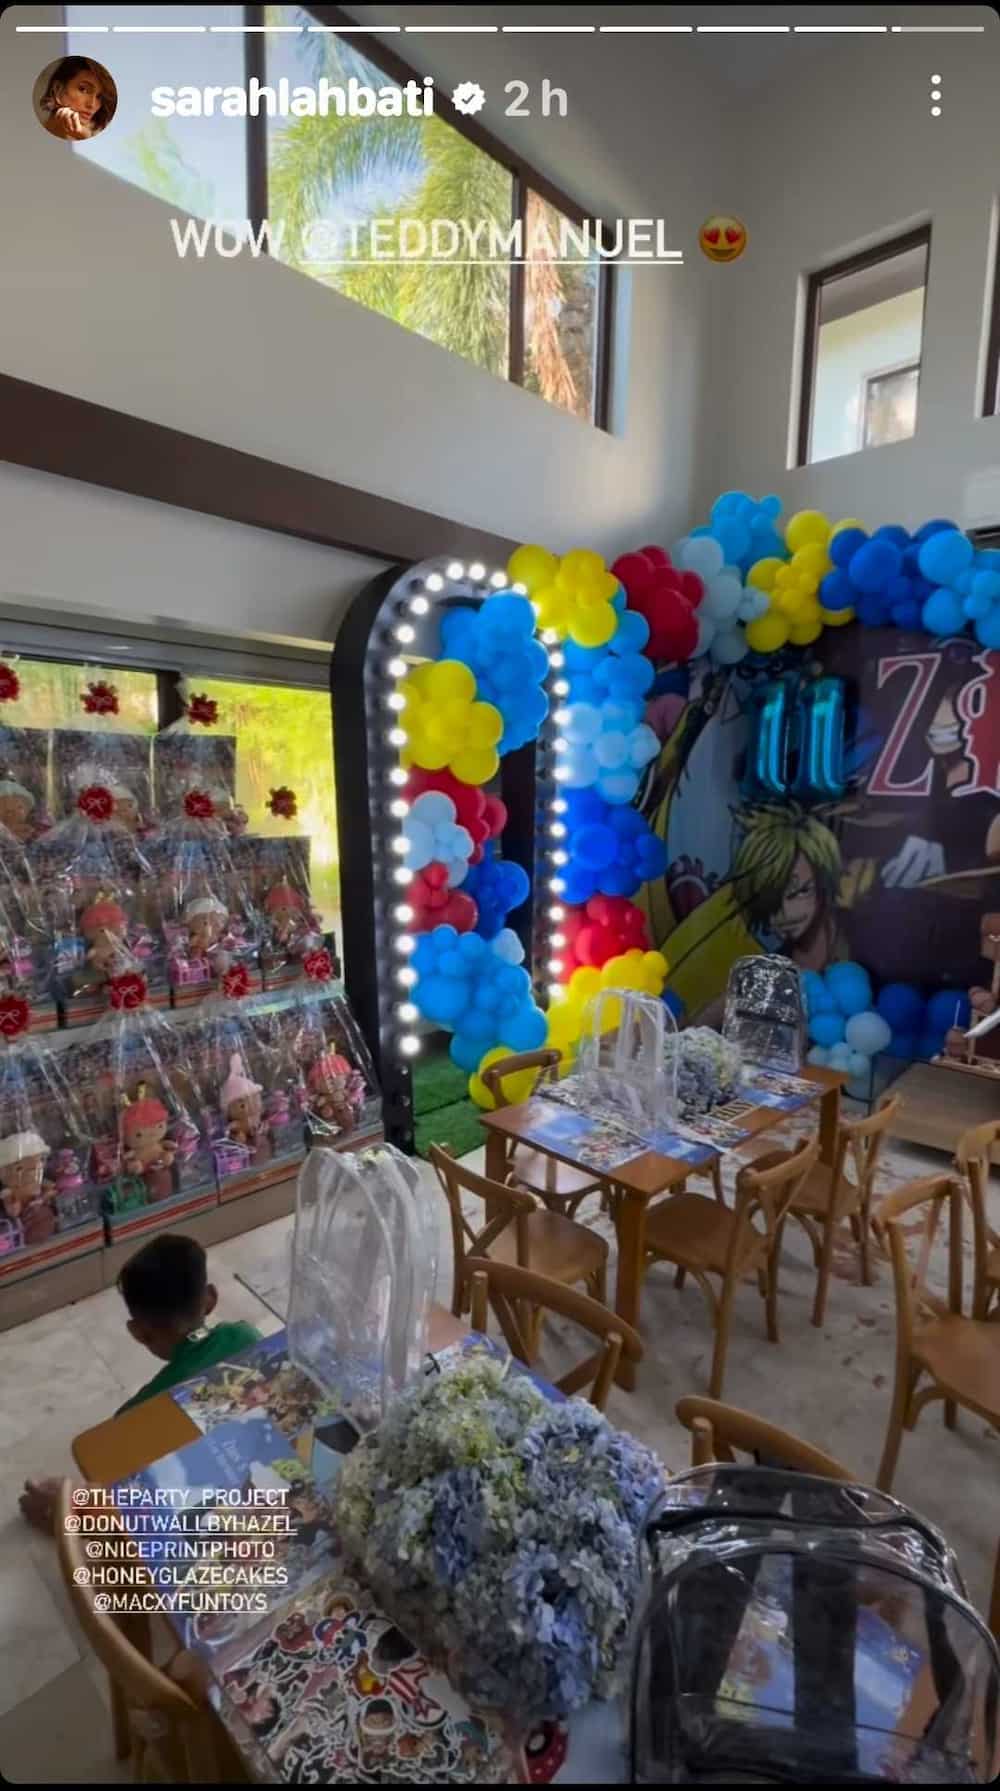 Sarah Lahbati shares glimpses into Zion Gutierrez’s ‘One Piece’- themed birthday celebration at home